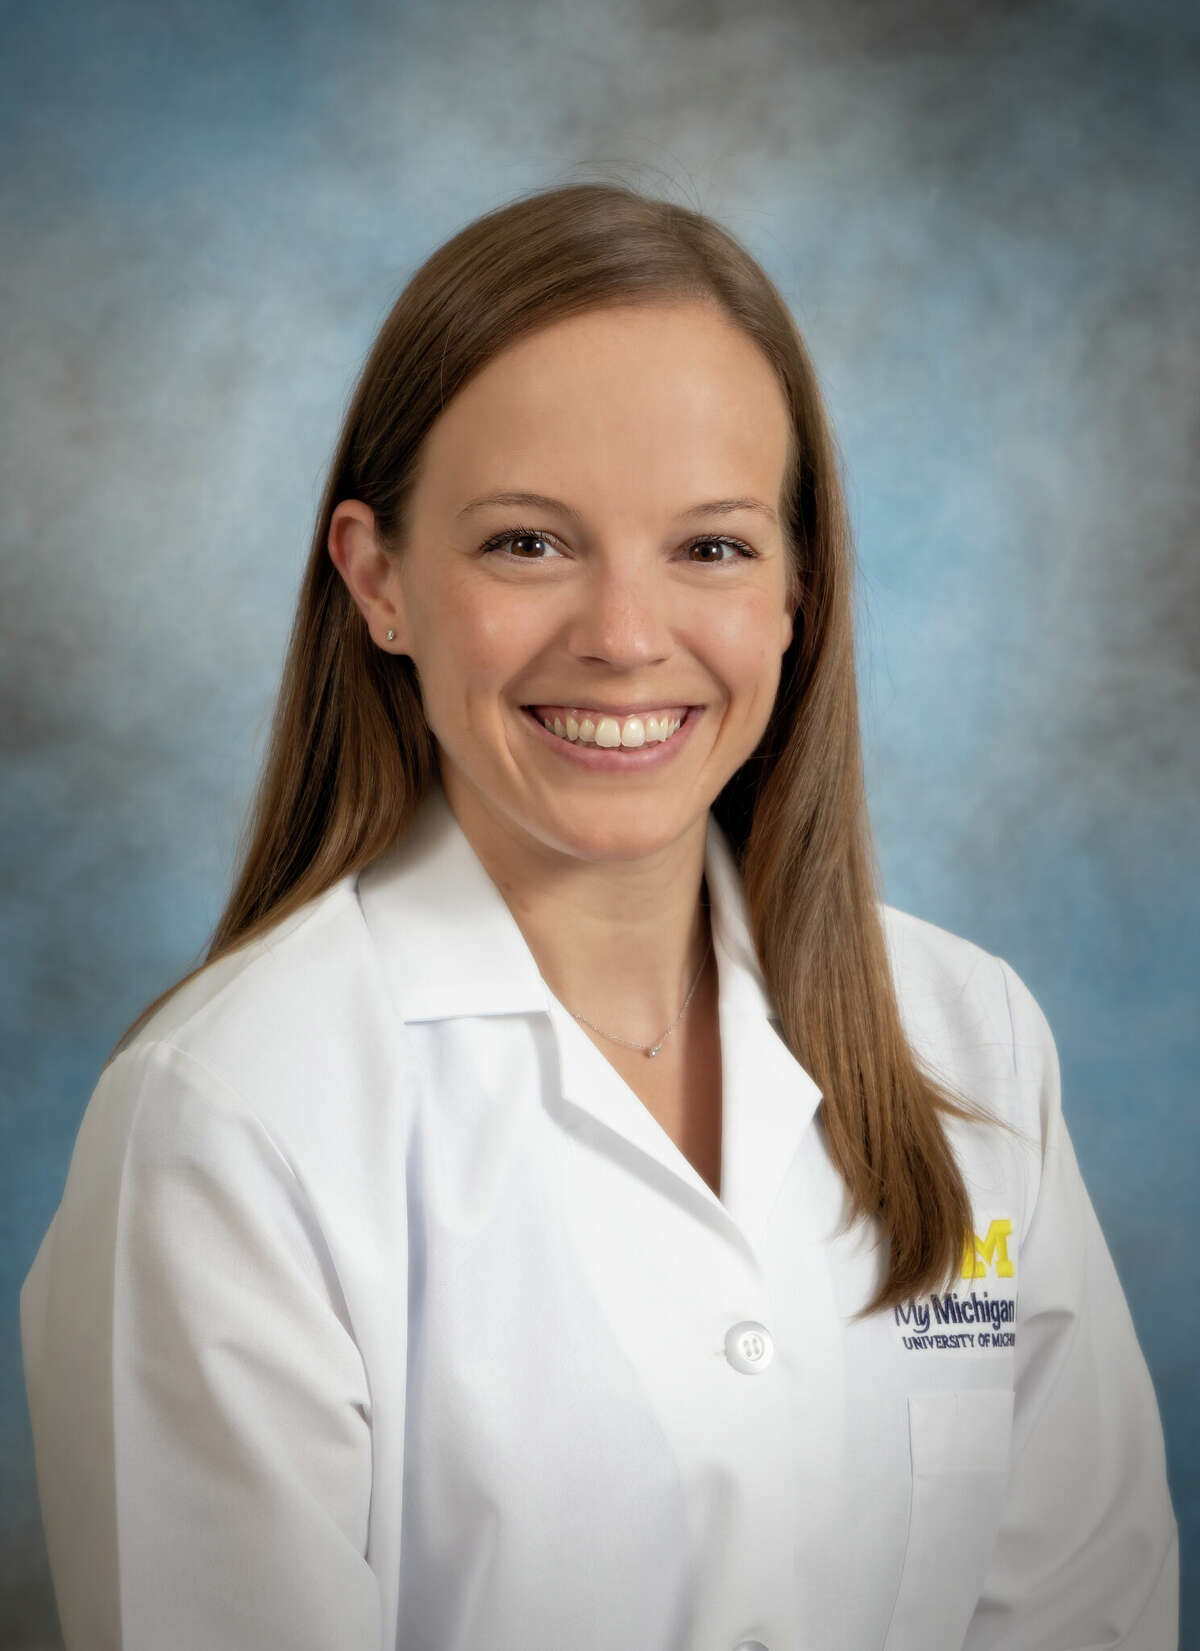 Ashley Nardone, D.O., specializes in neurology and neurohospitalist medicine. She sees outpatients at MyMichigan Neurology in the Orchard Building and provides care for inpatients who are hospitalized with neurologic conditions at MyMichigan Medical Center Midland.